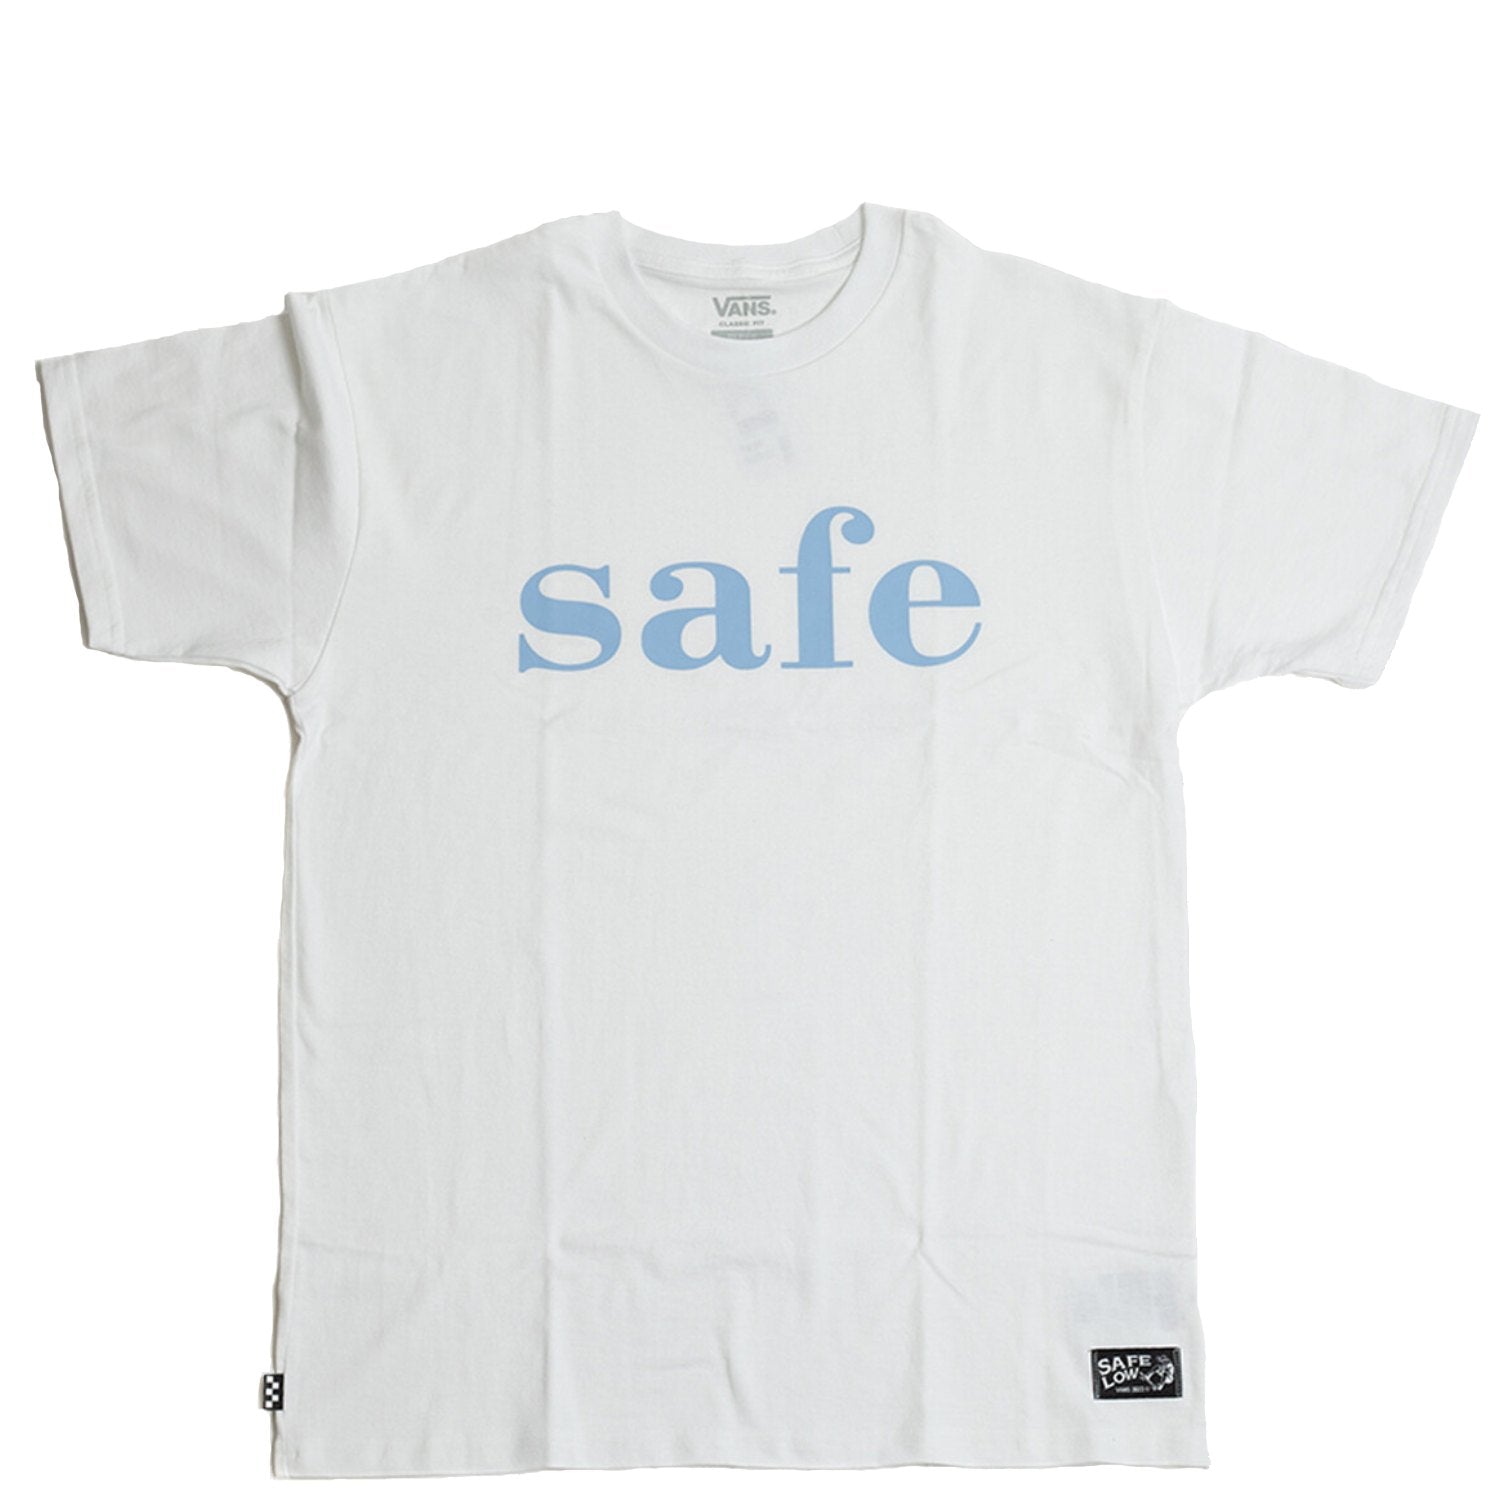 Vans - PALACE Safe Low Short-Sleeve Tee - White with Blue Letters